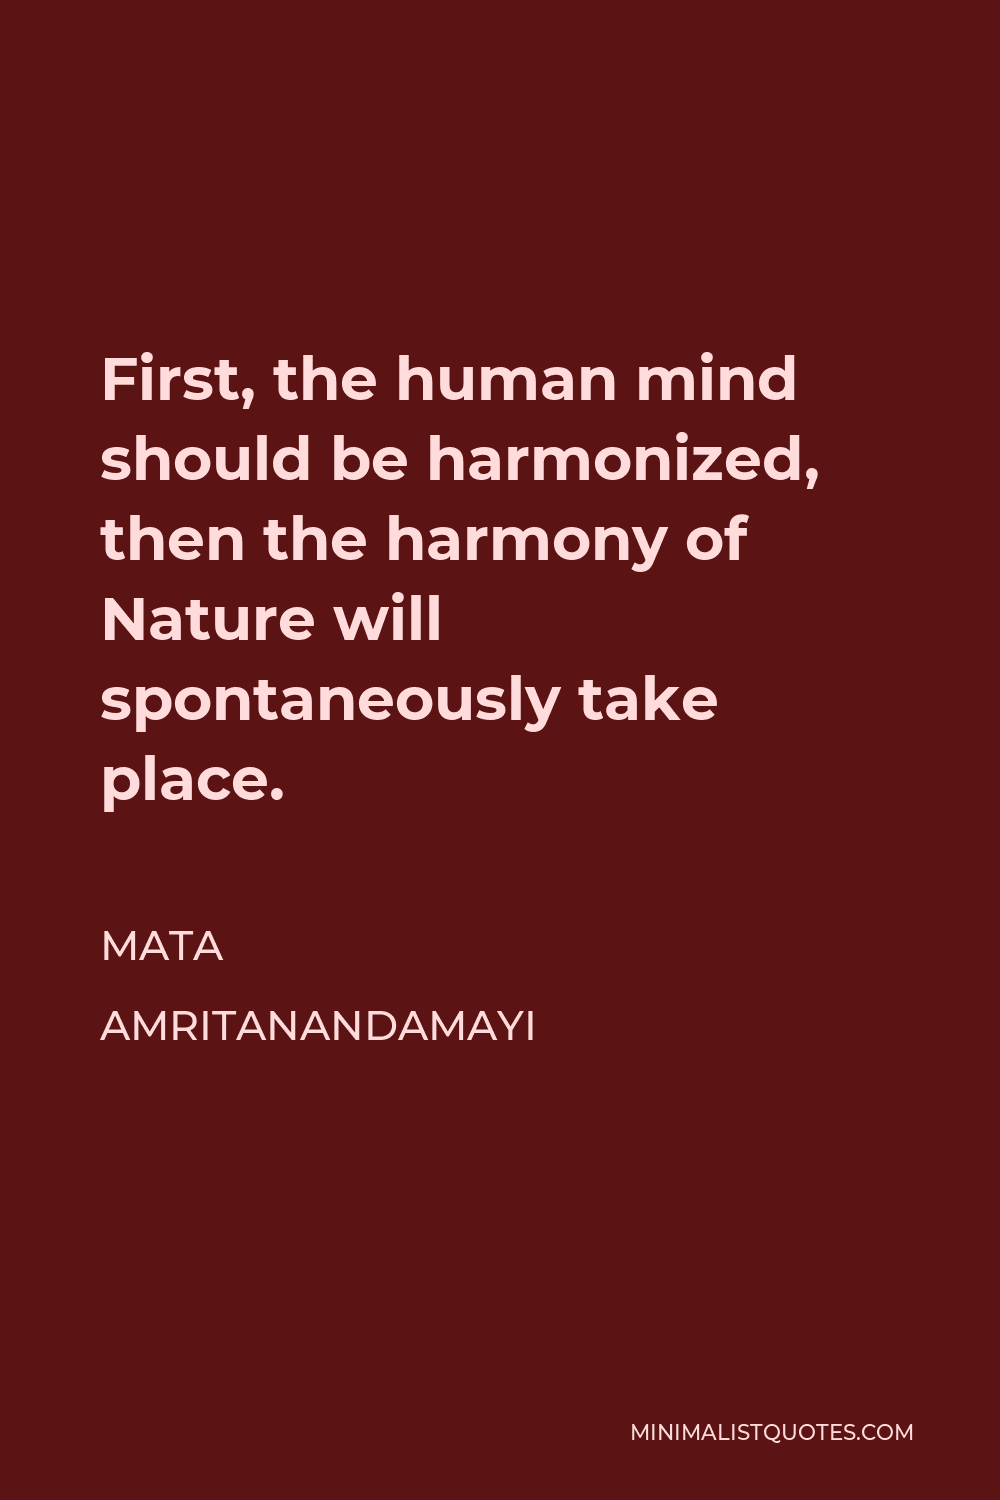 Mata Amritanandamayi Quote - First, the human mind should be harmonized, then the harmony of Nature will spontaneously take place.